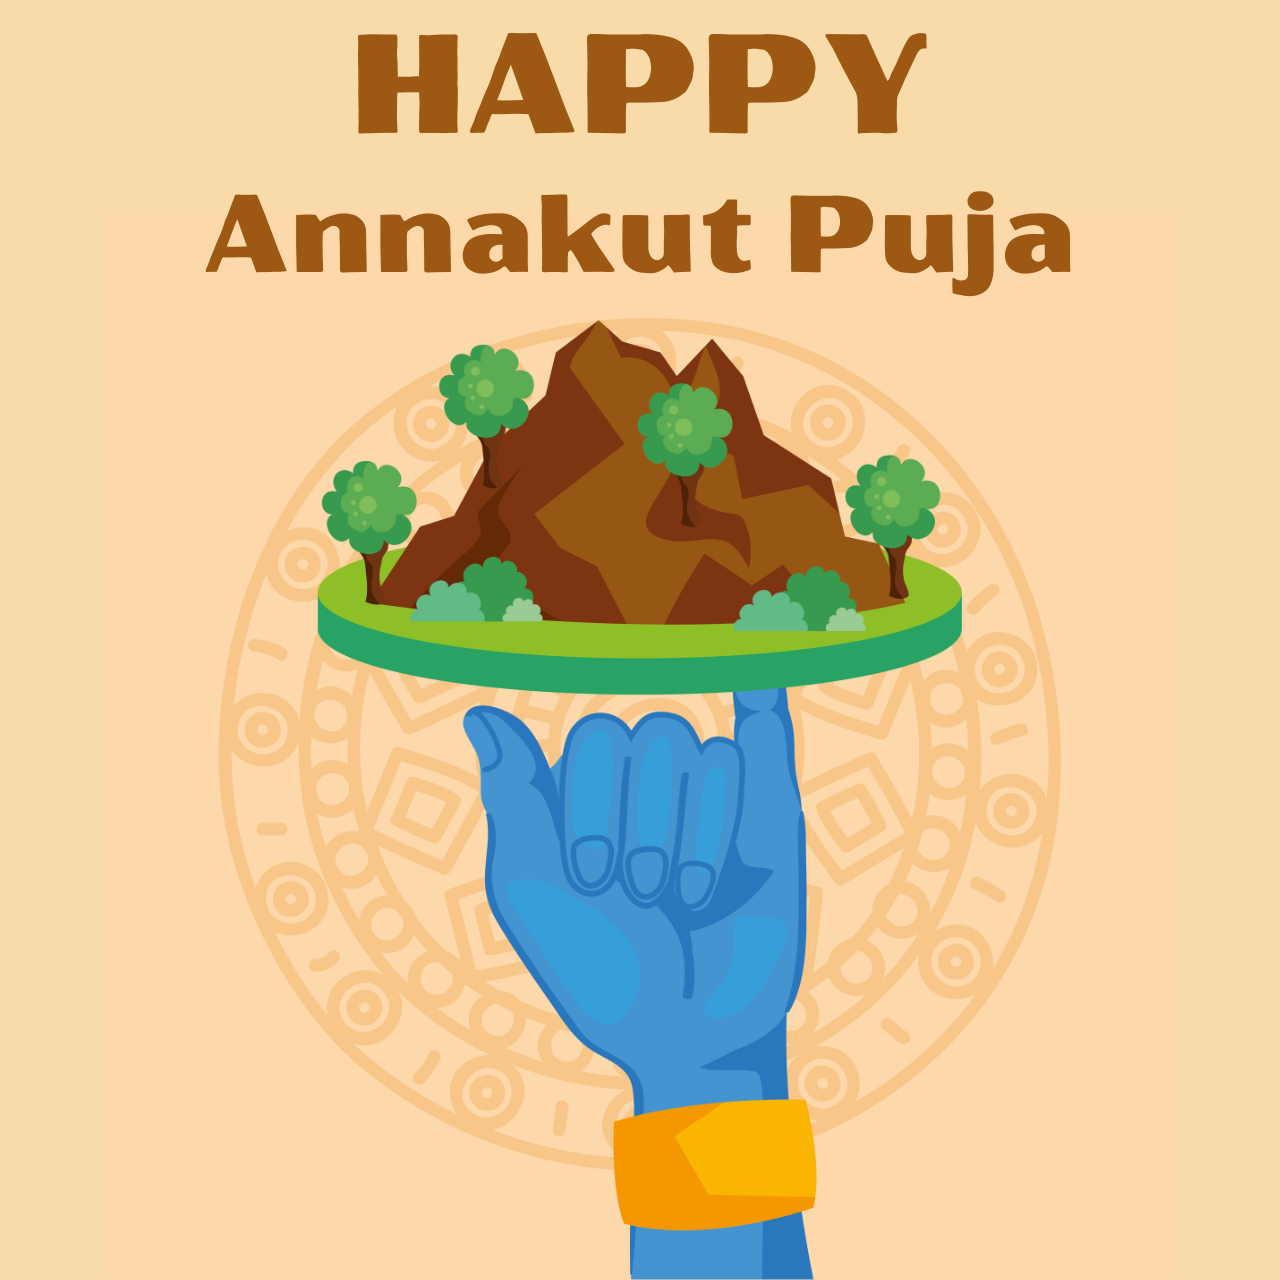 Annakut Puja 2023: Hindi Wishes, Images, Quotes, Messages, Greetings, Sayings, Shayari, Posters, Banners and Slogans